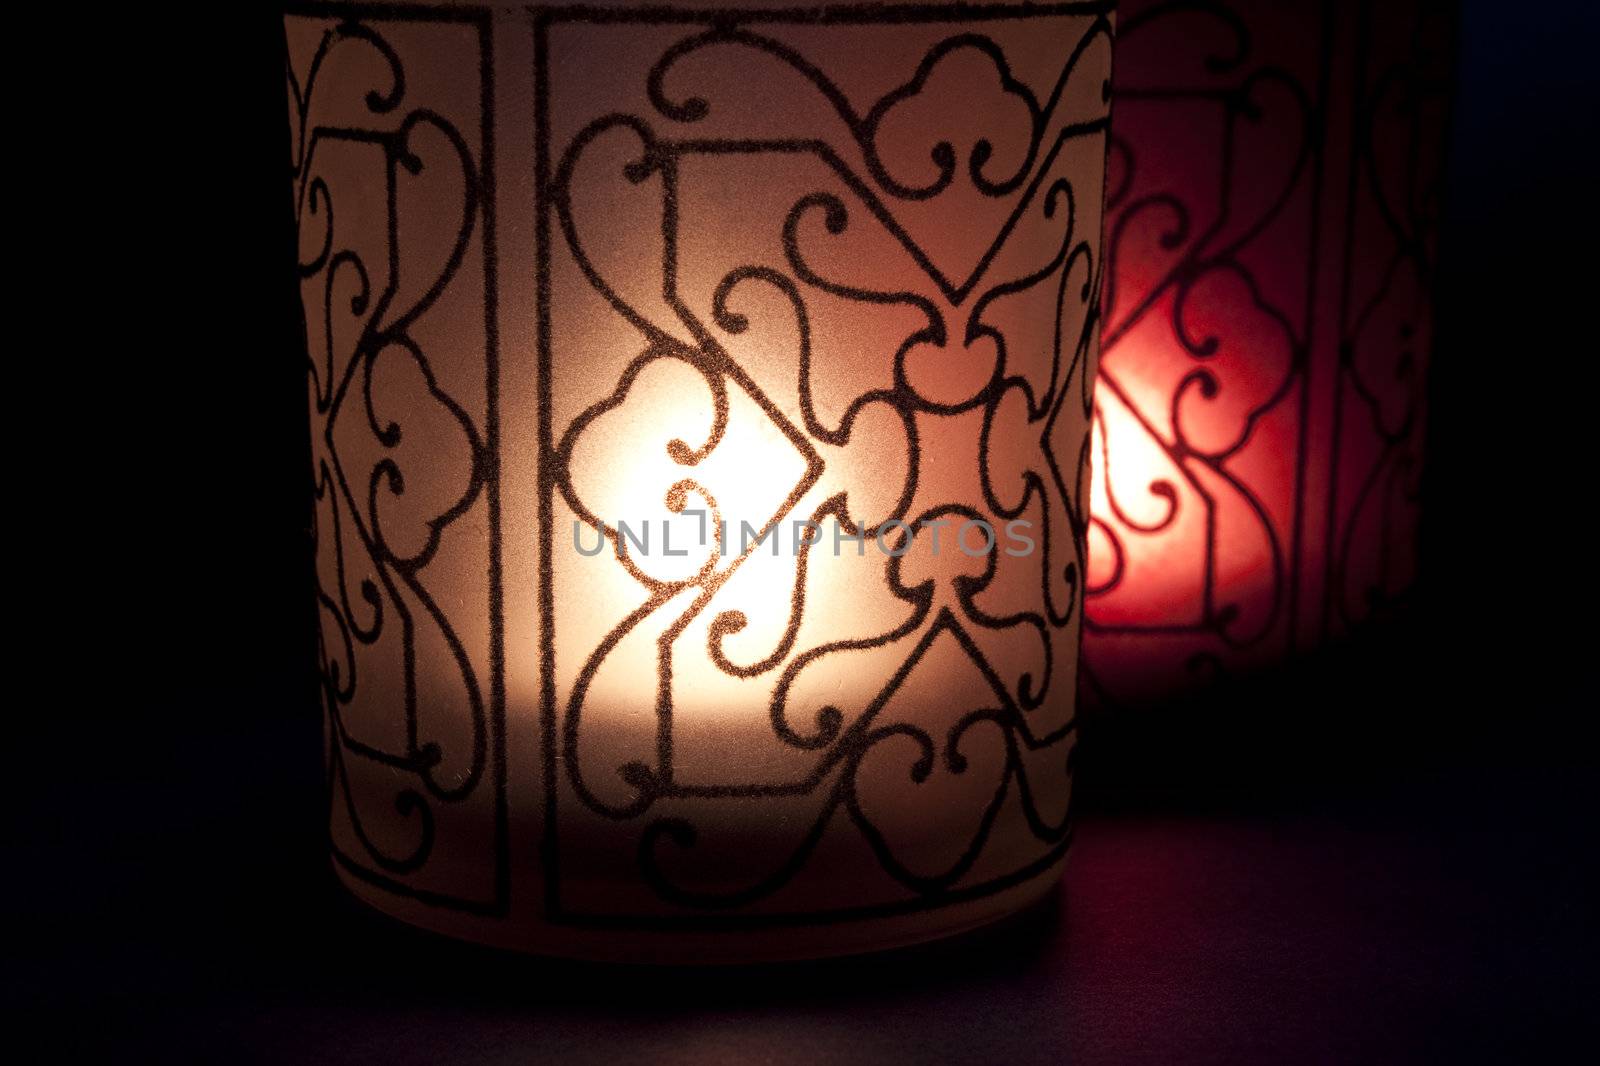 Stylized candles with light of hope in the darkness